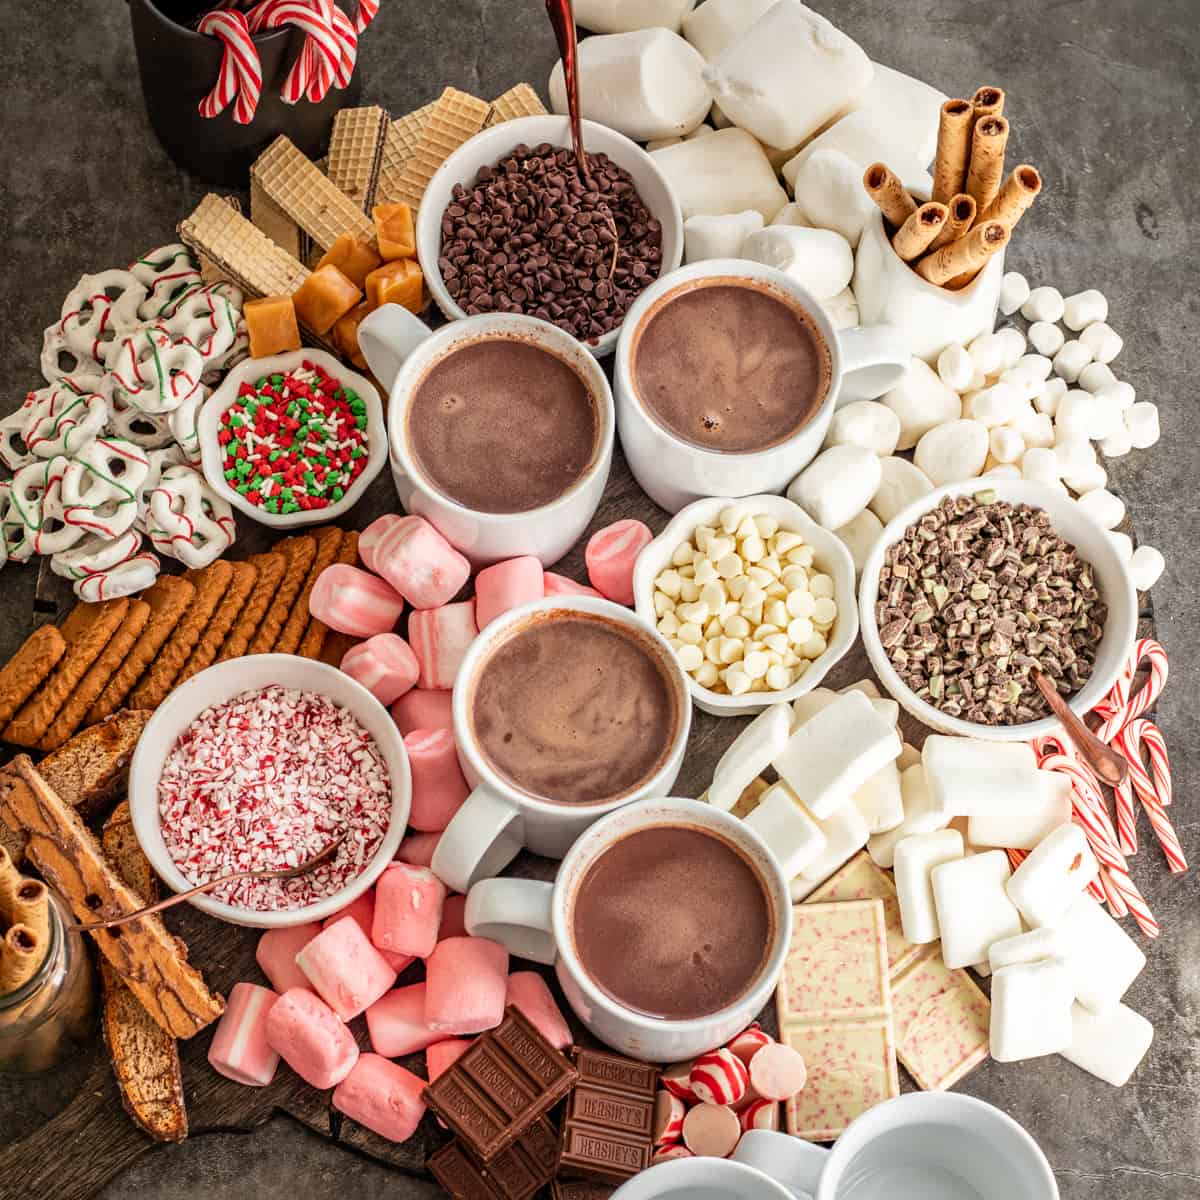 Hot Chocolate Toppings - For a DIY Hot Chocolate Bar